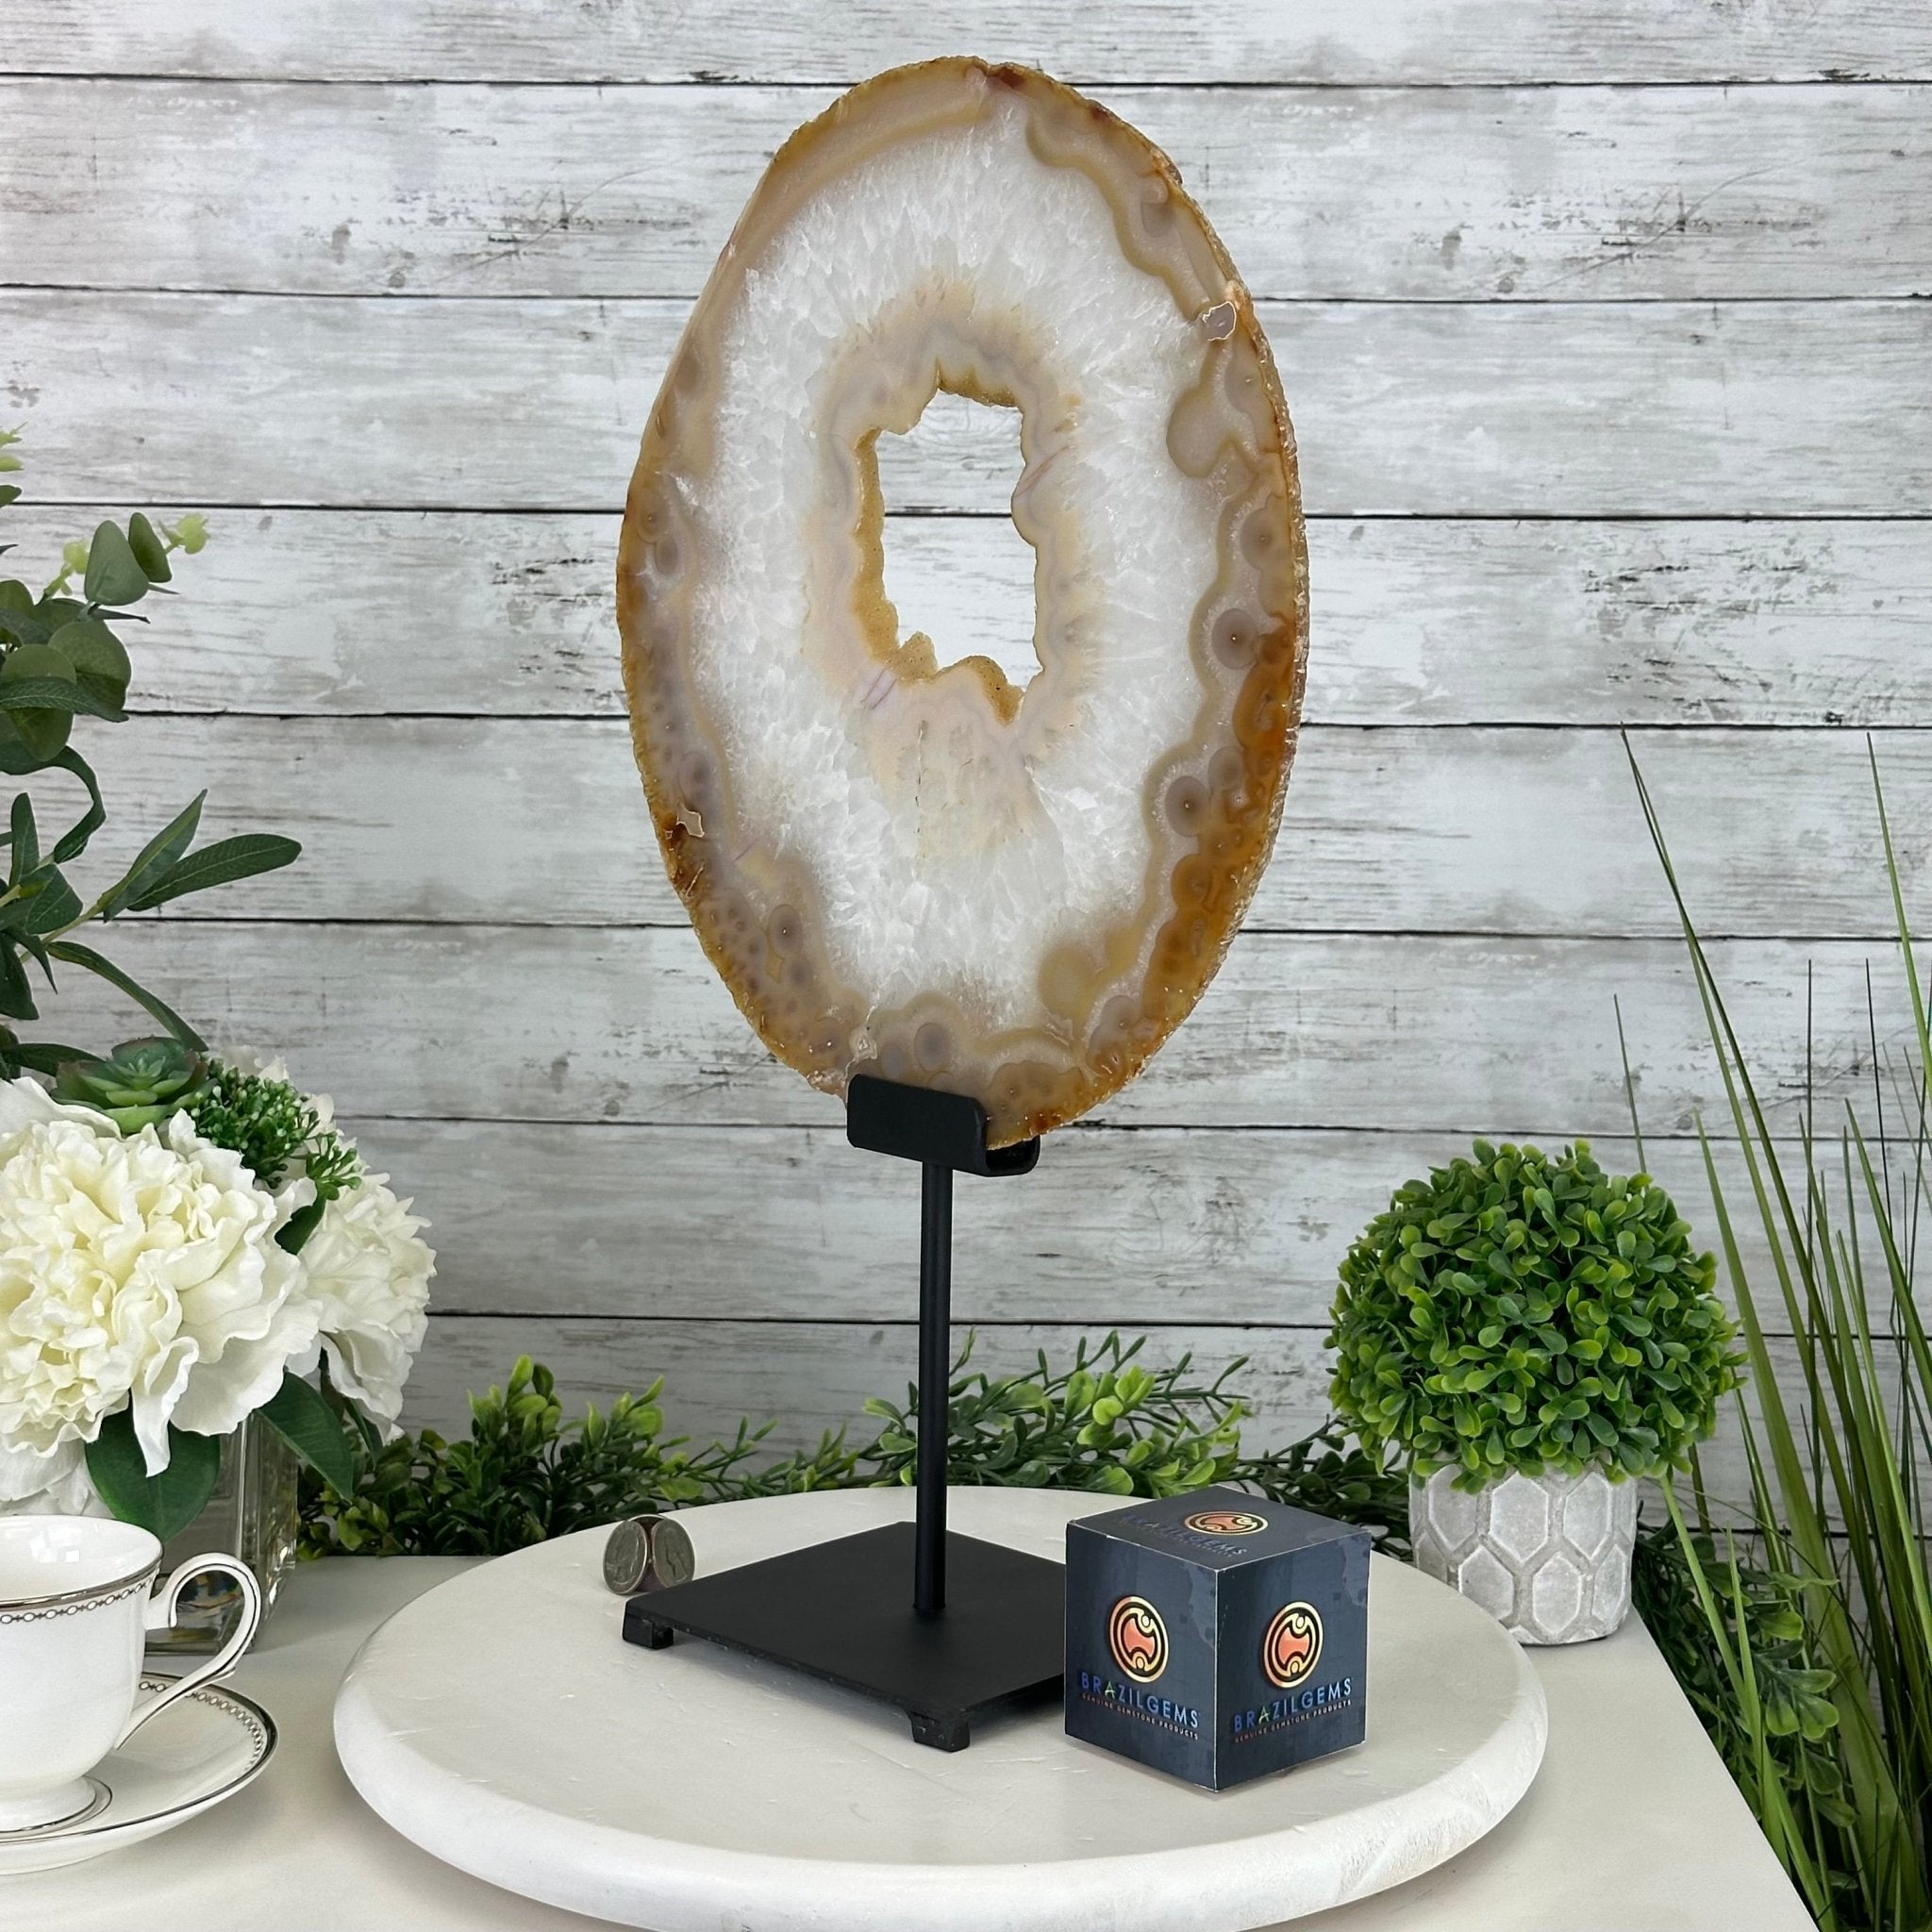 Special Large Natural Brazilian Agate Slice on a Metal Stand, 19.6" Tall #5056-0036 - Brazil GemsBrazil GemsSpecial Large Natural Brazilian Agate Slice on a Metal Stand, 19.6" Tall #5056-0036Slices on Fixed Bases5056-0036